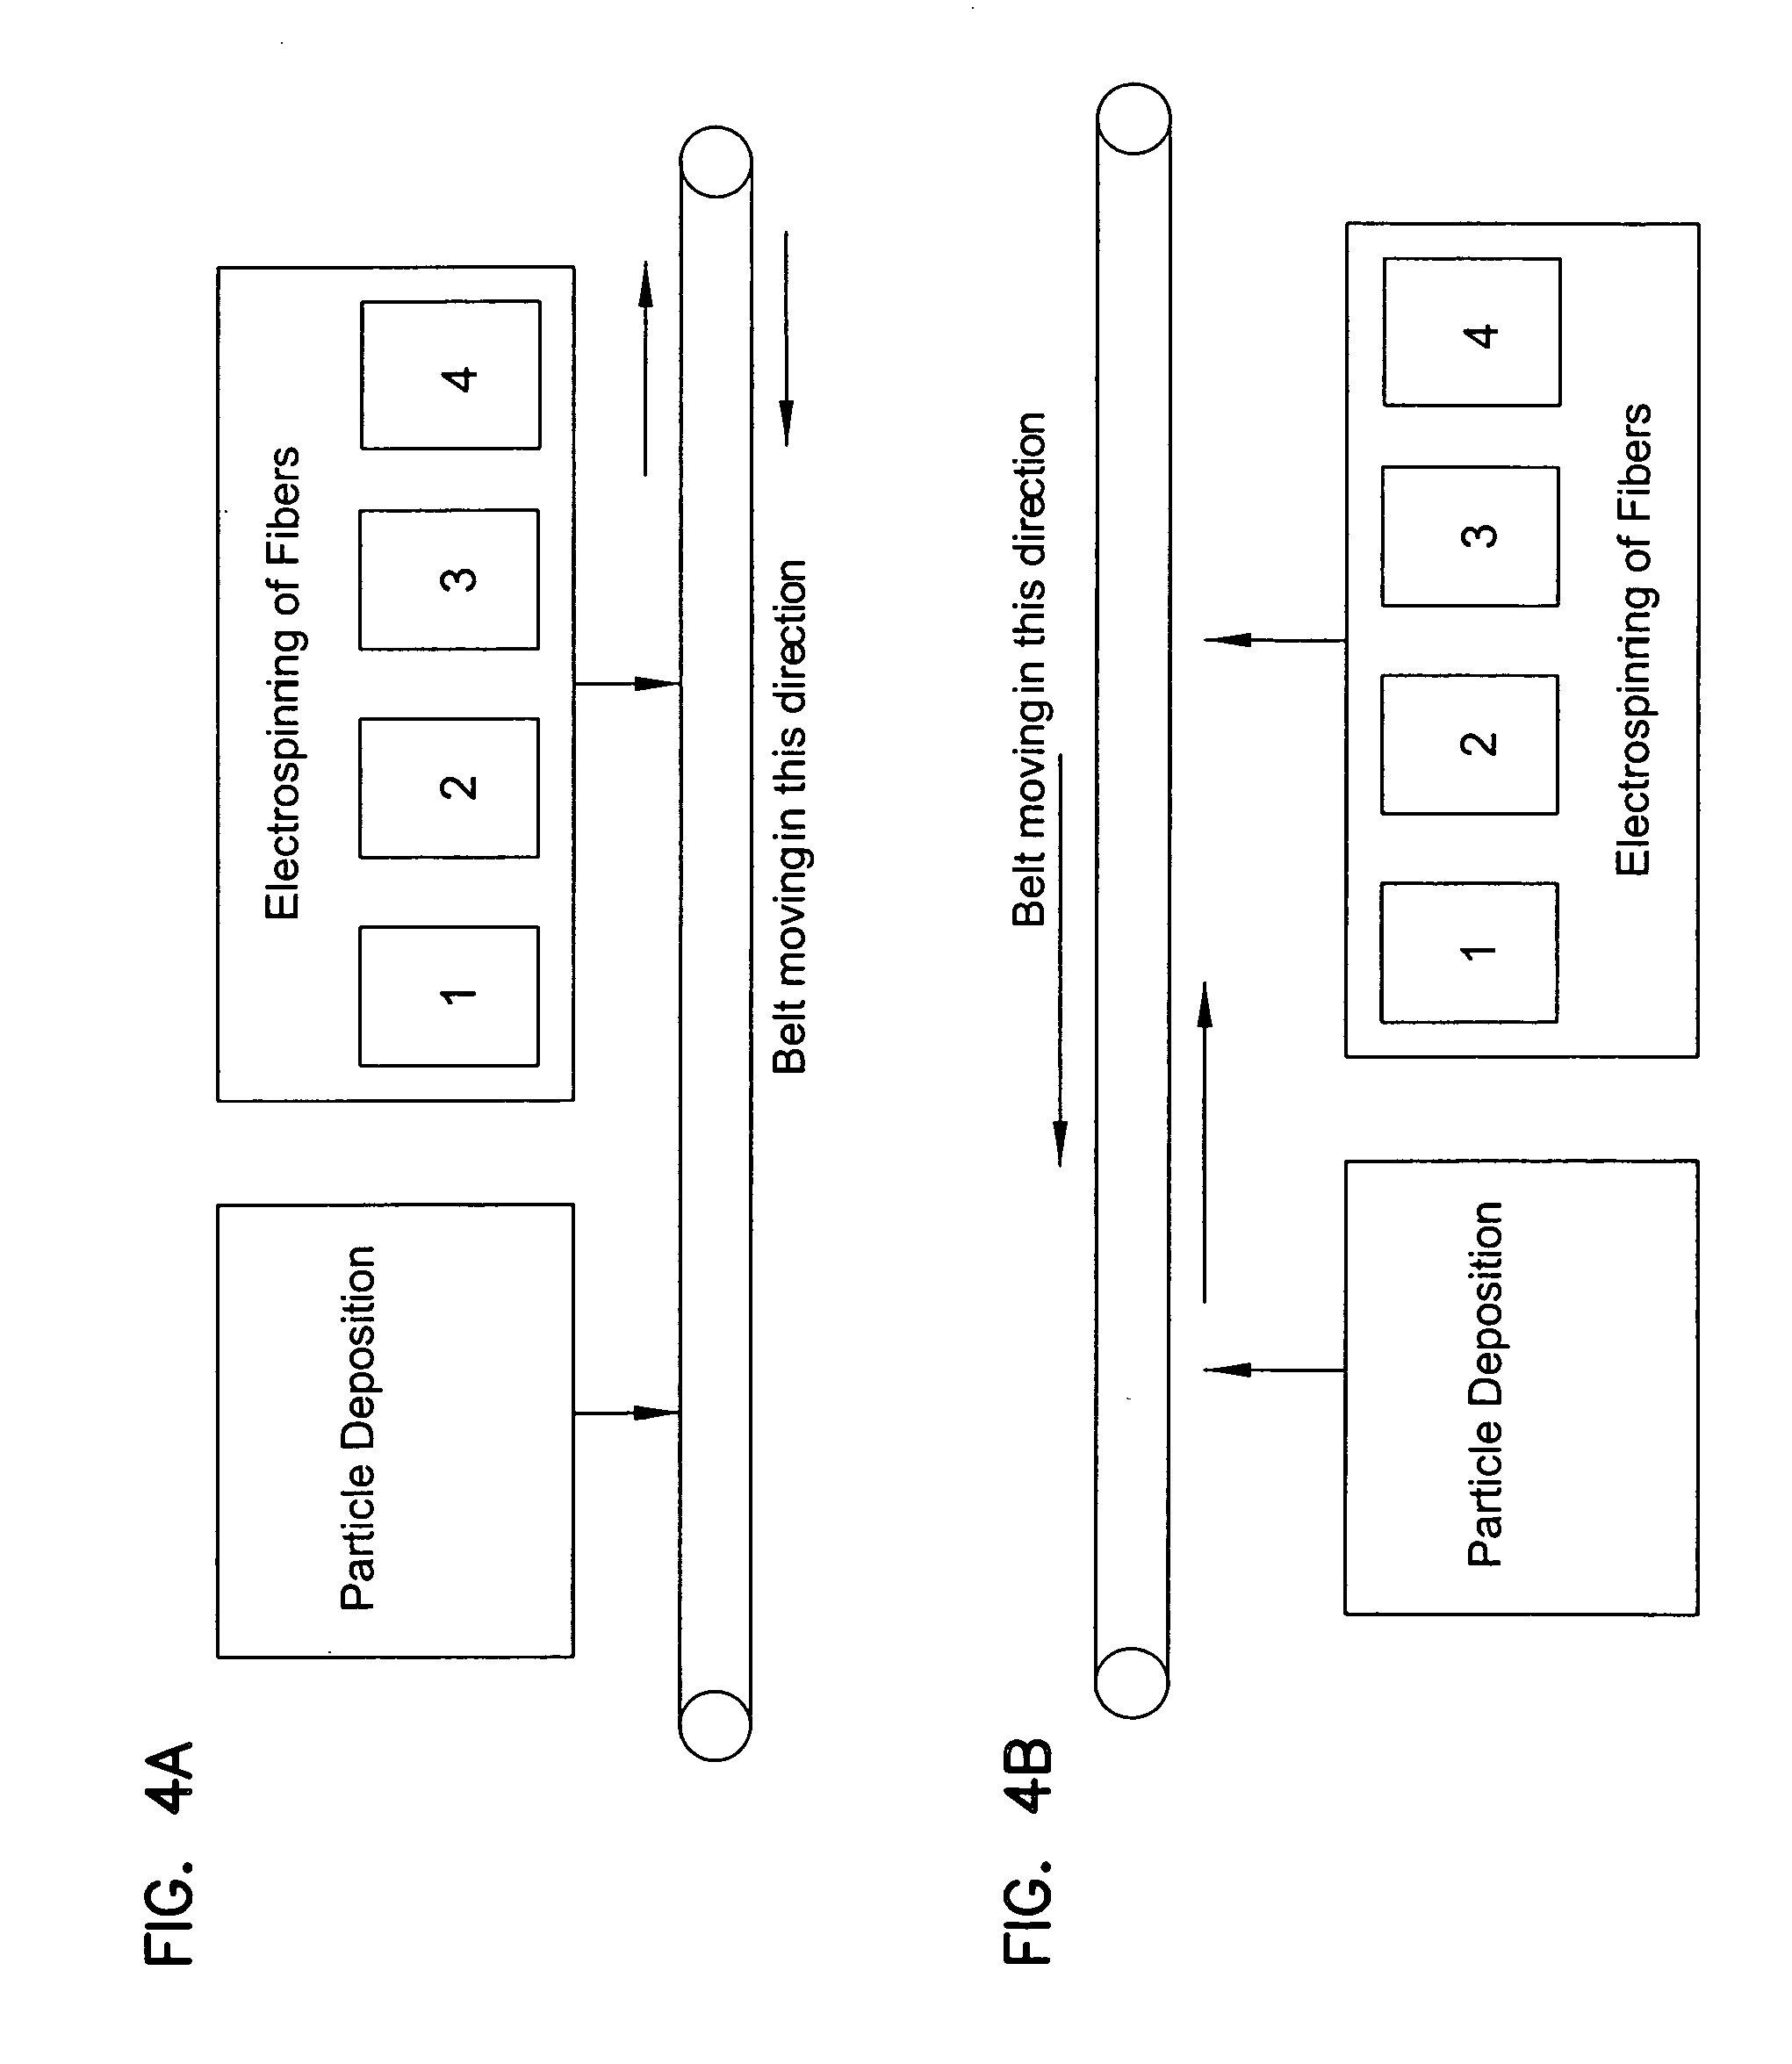 Reduced solidity web comprising fiber and fiber spacer or separation means